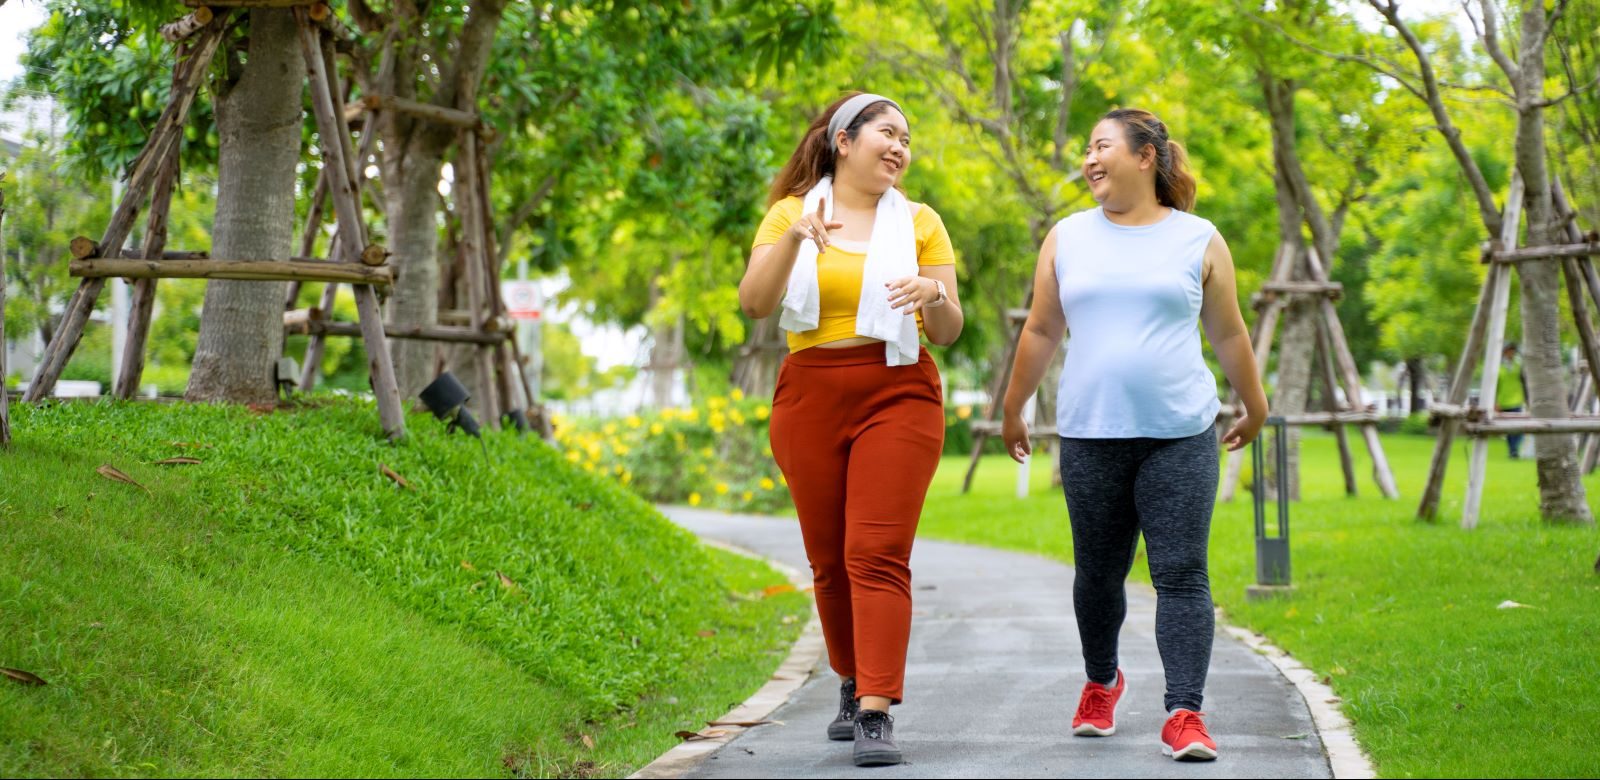 To lose weight, you have to set aside time to be active. Here are three physical activity goals for weight loss.